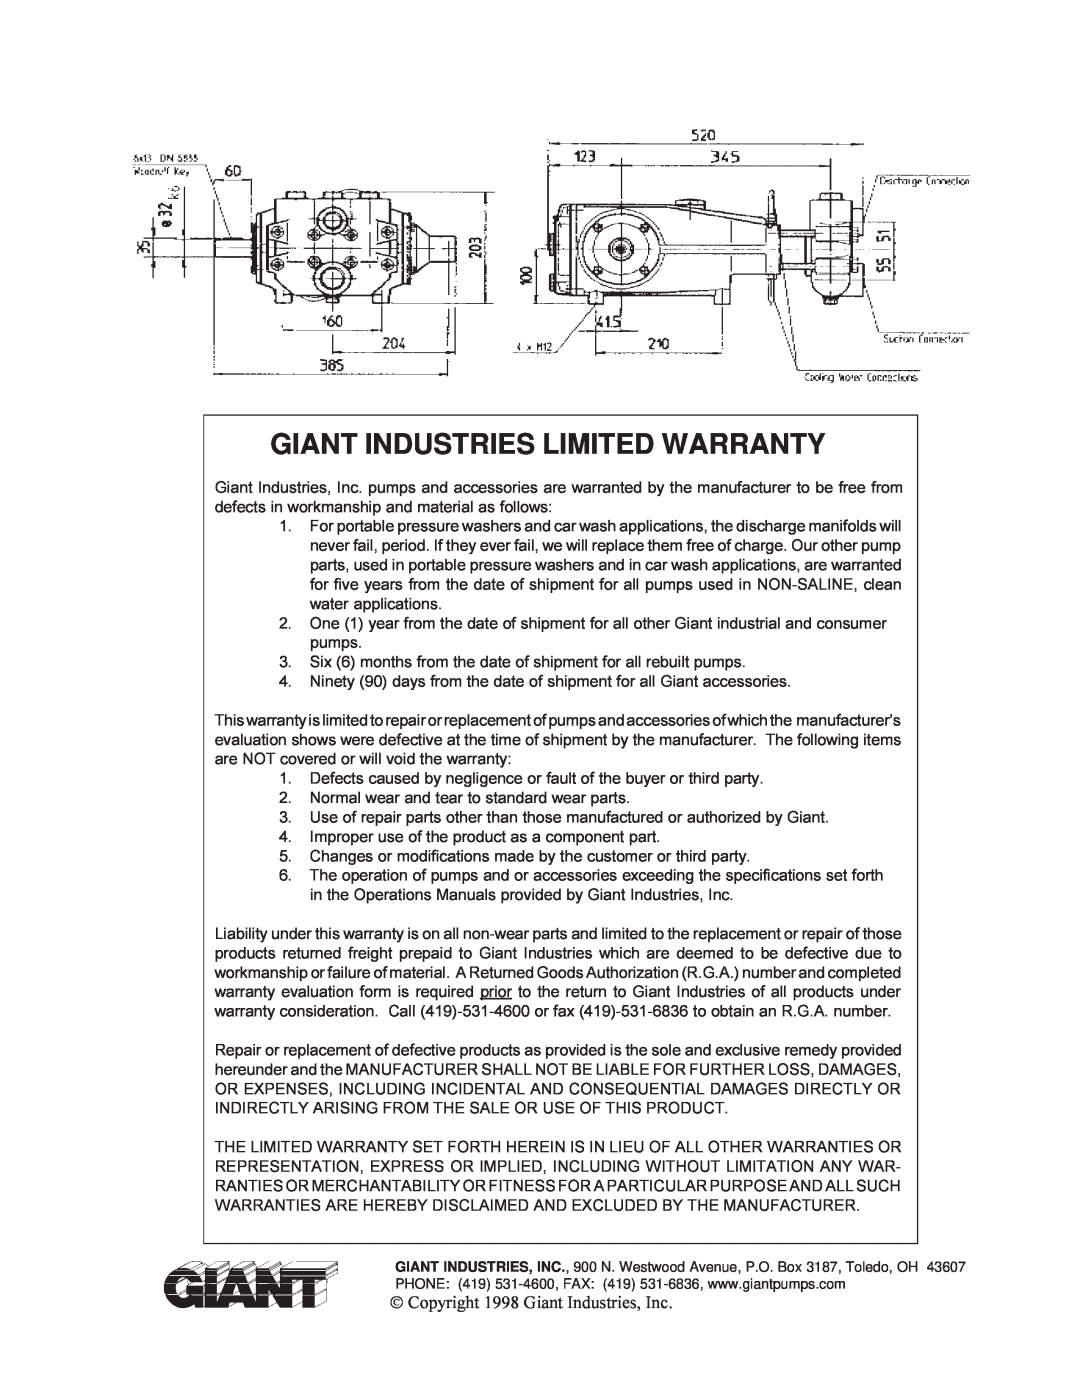 Giant LP121HT installation instructions Giant Industries Limited Warranty, Ó Copyright 1998 Giant Industries, Inc 